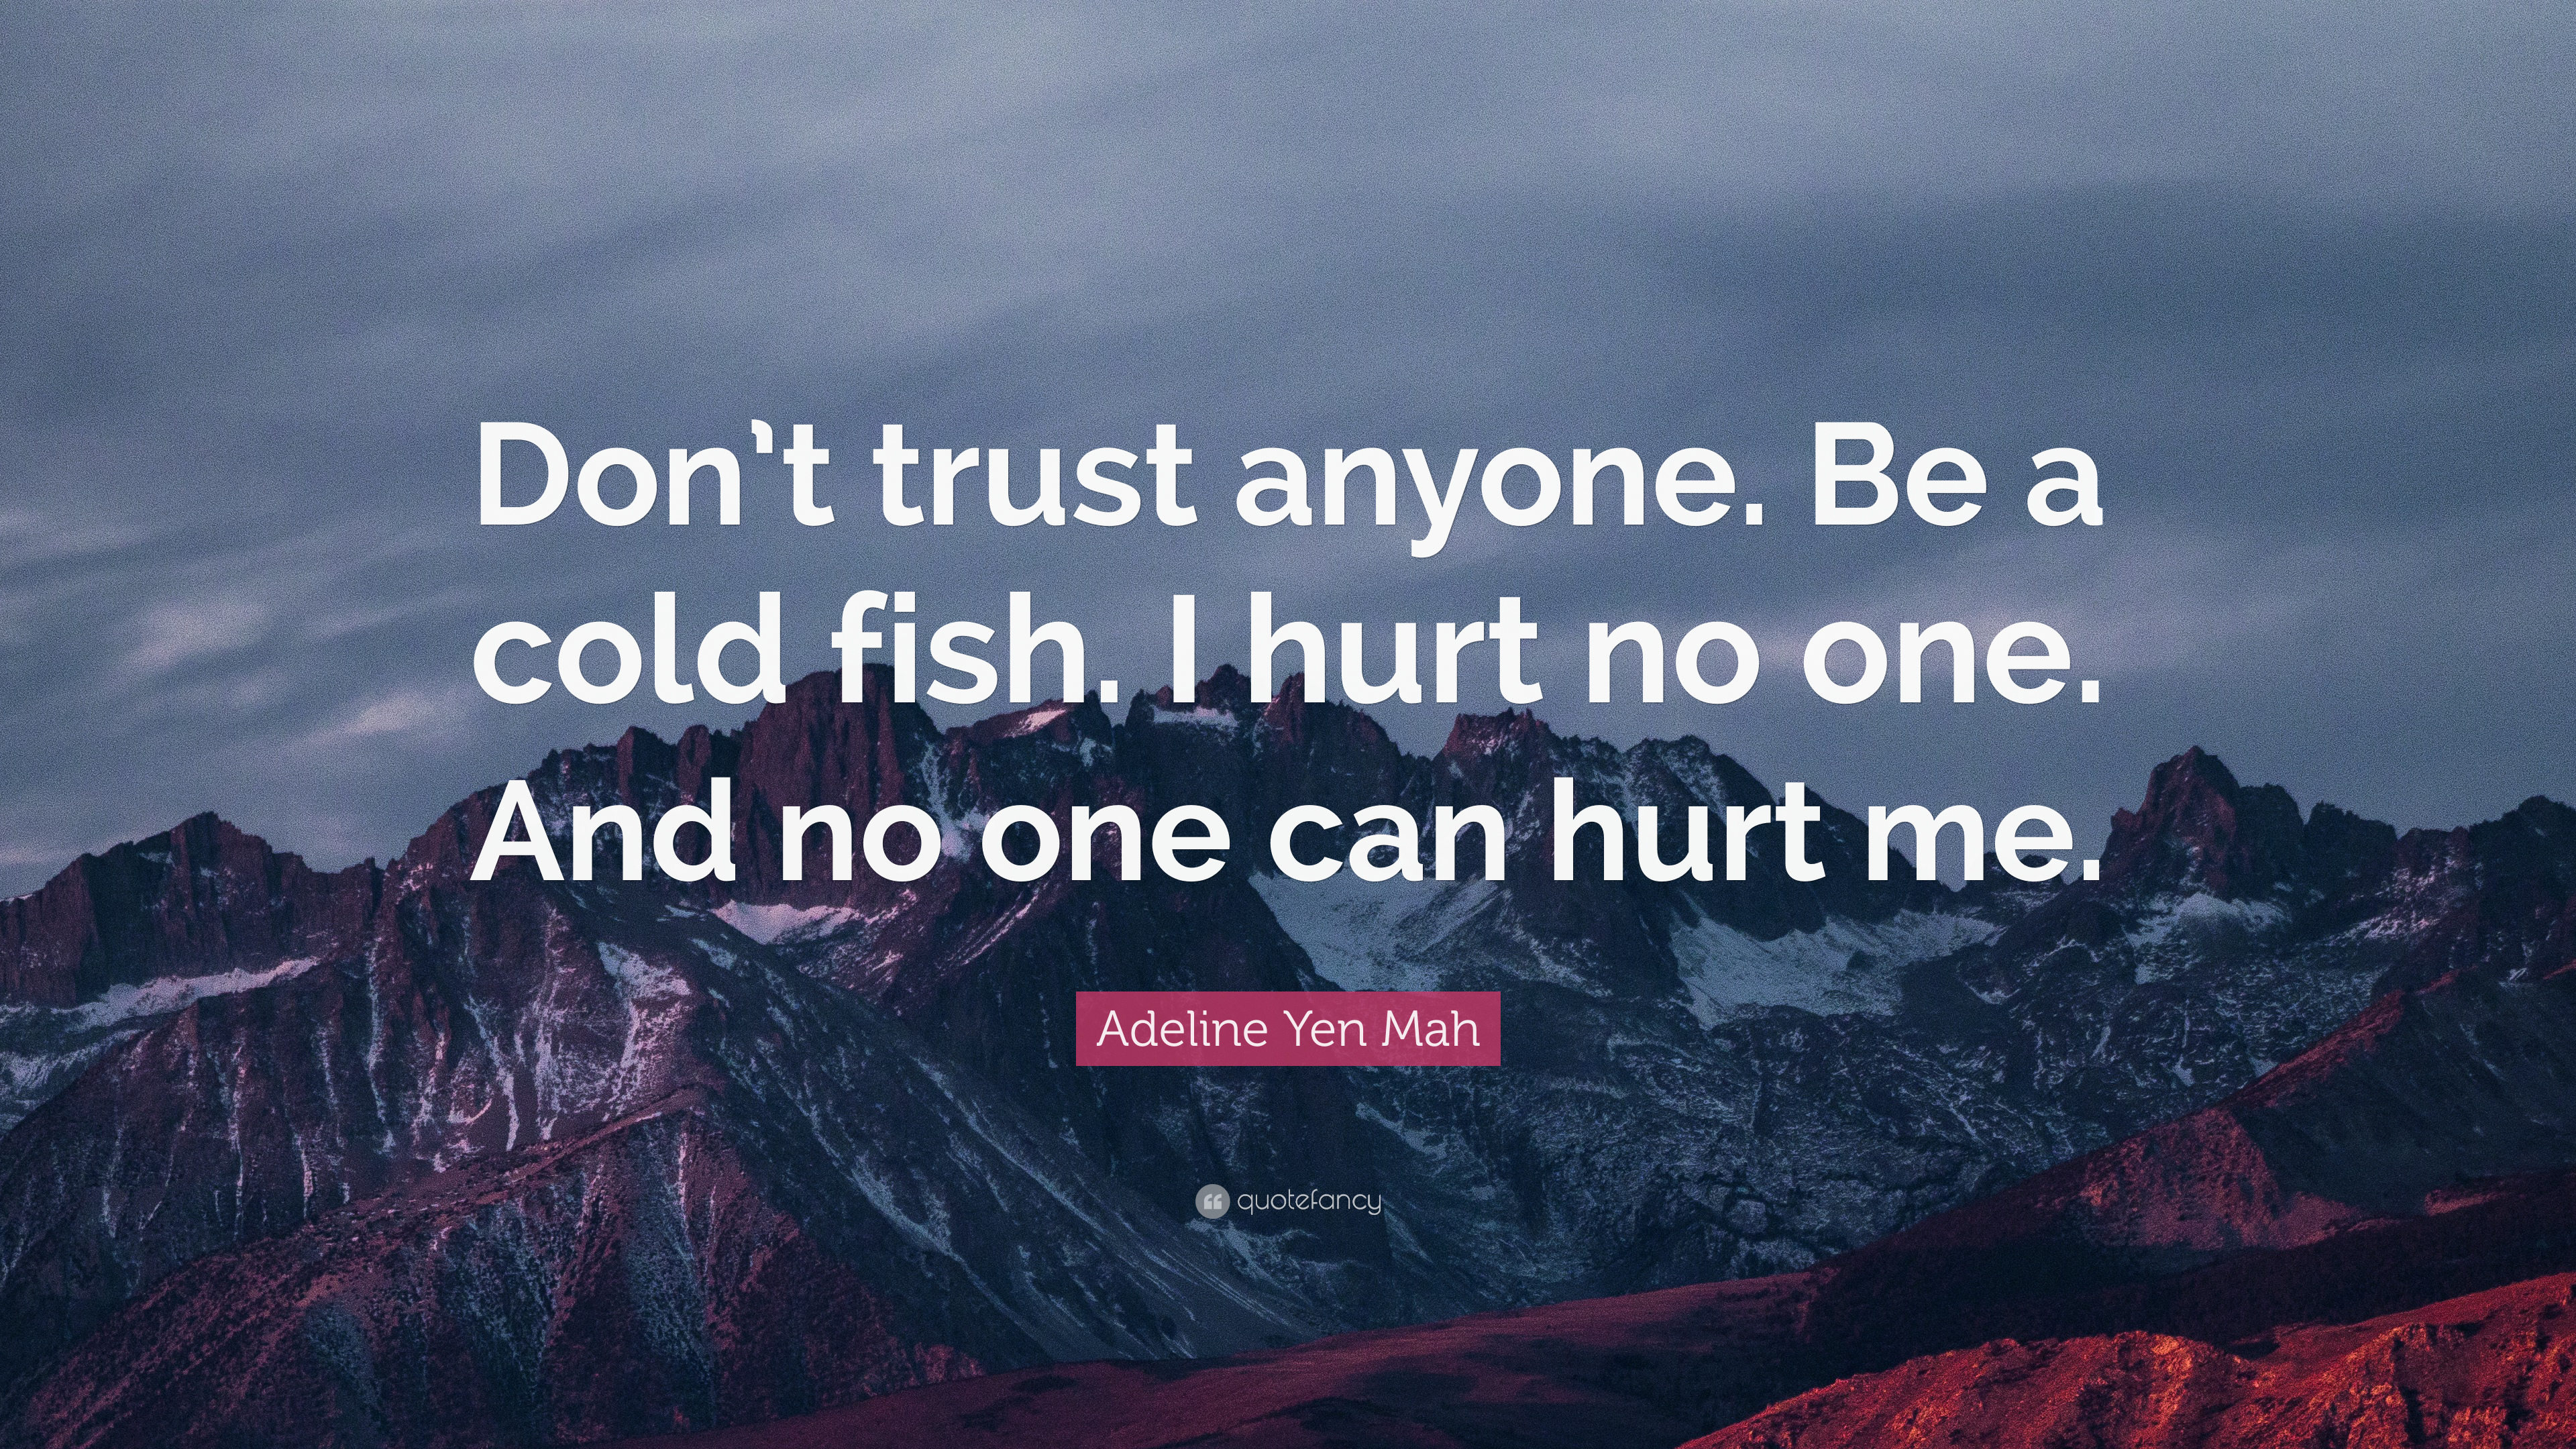 Adeline yen mah quote âdont trust anyone be a cold fish i hurt no one